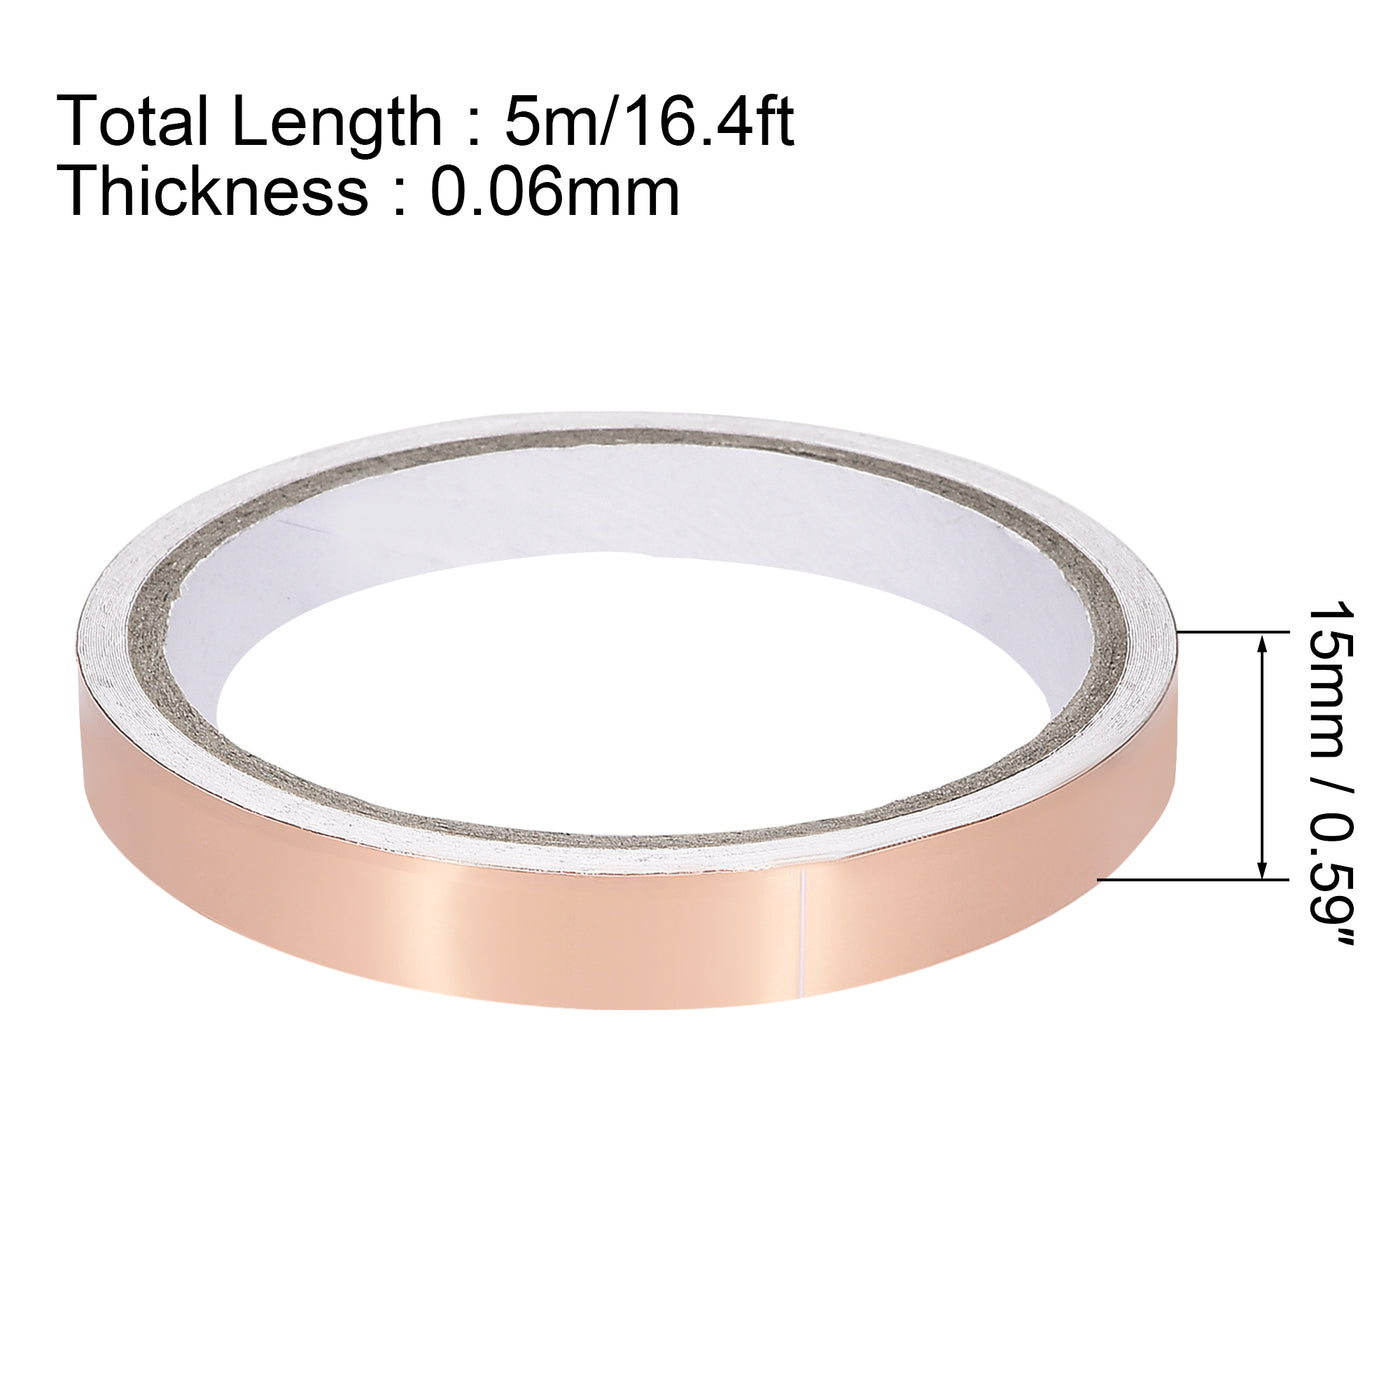 uxcell Uxcell Single-Sided Conductive Tape Copper Foil Tape 15mm x 5m/16.4ft for EMI Shielding 4pcs